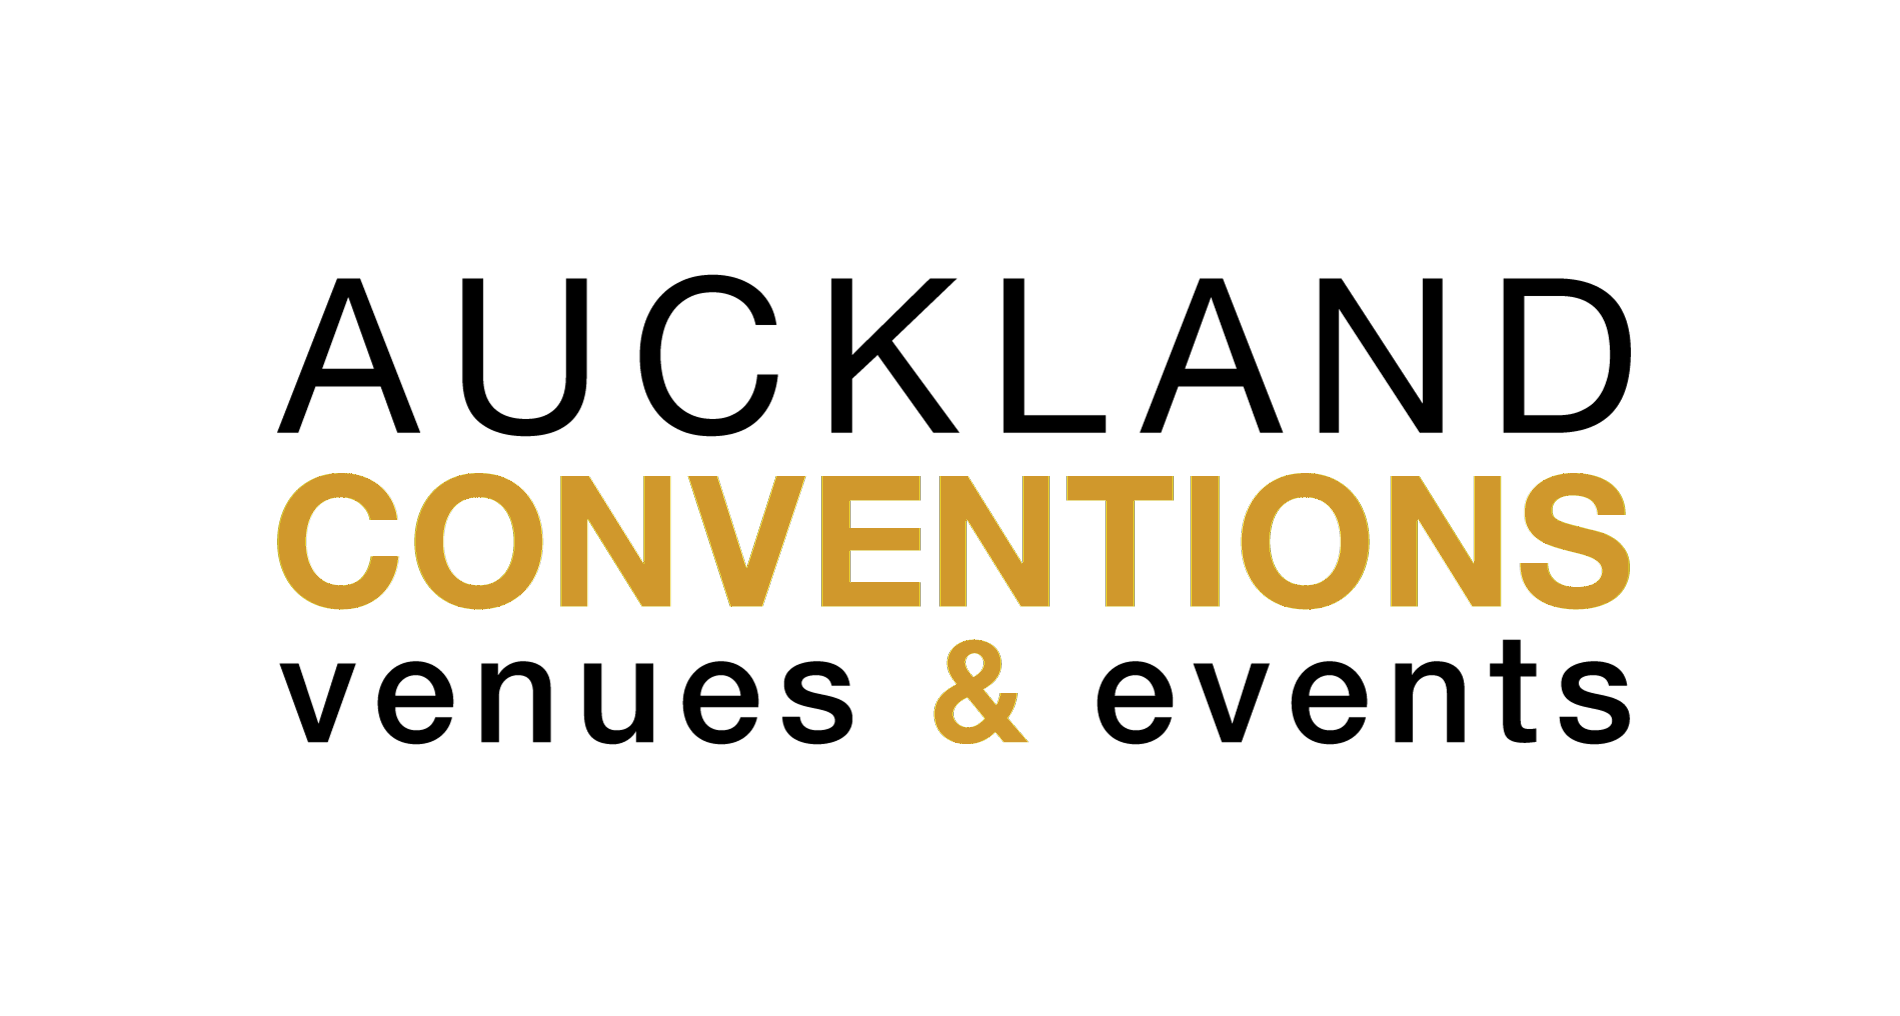 https://rfacdn.nz/conventions/assets/media/ac-secondarylogo-black-and-gold-website.png